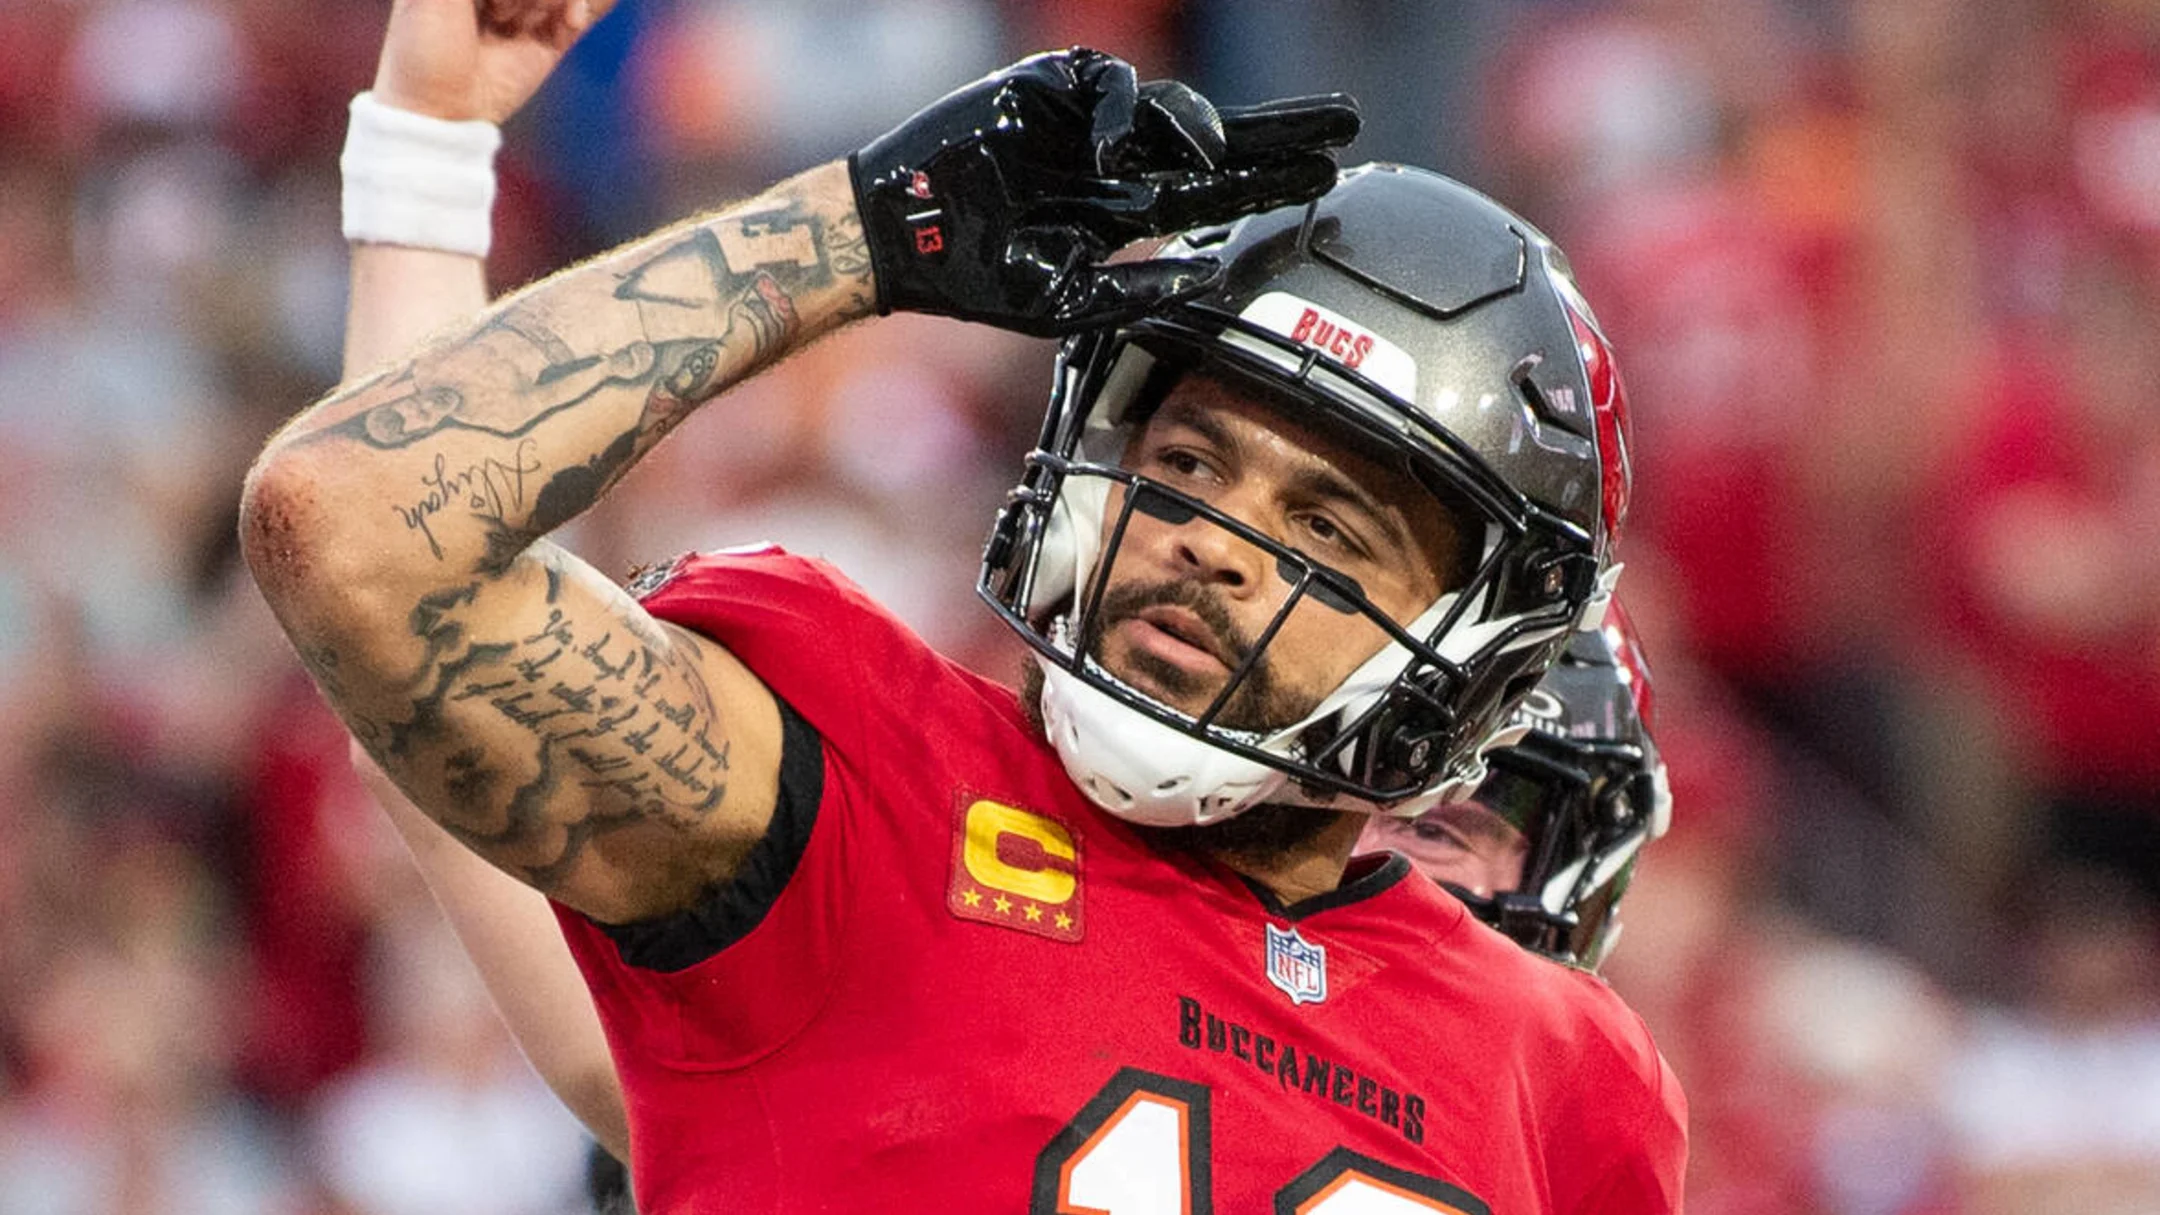 Mike Evans Eyes Elite QB Partnership and Top WR Pay in Free Agency Adventure